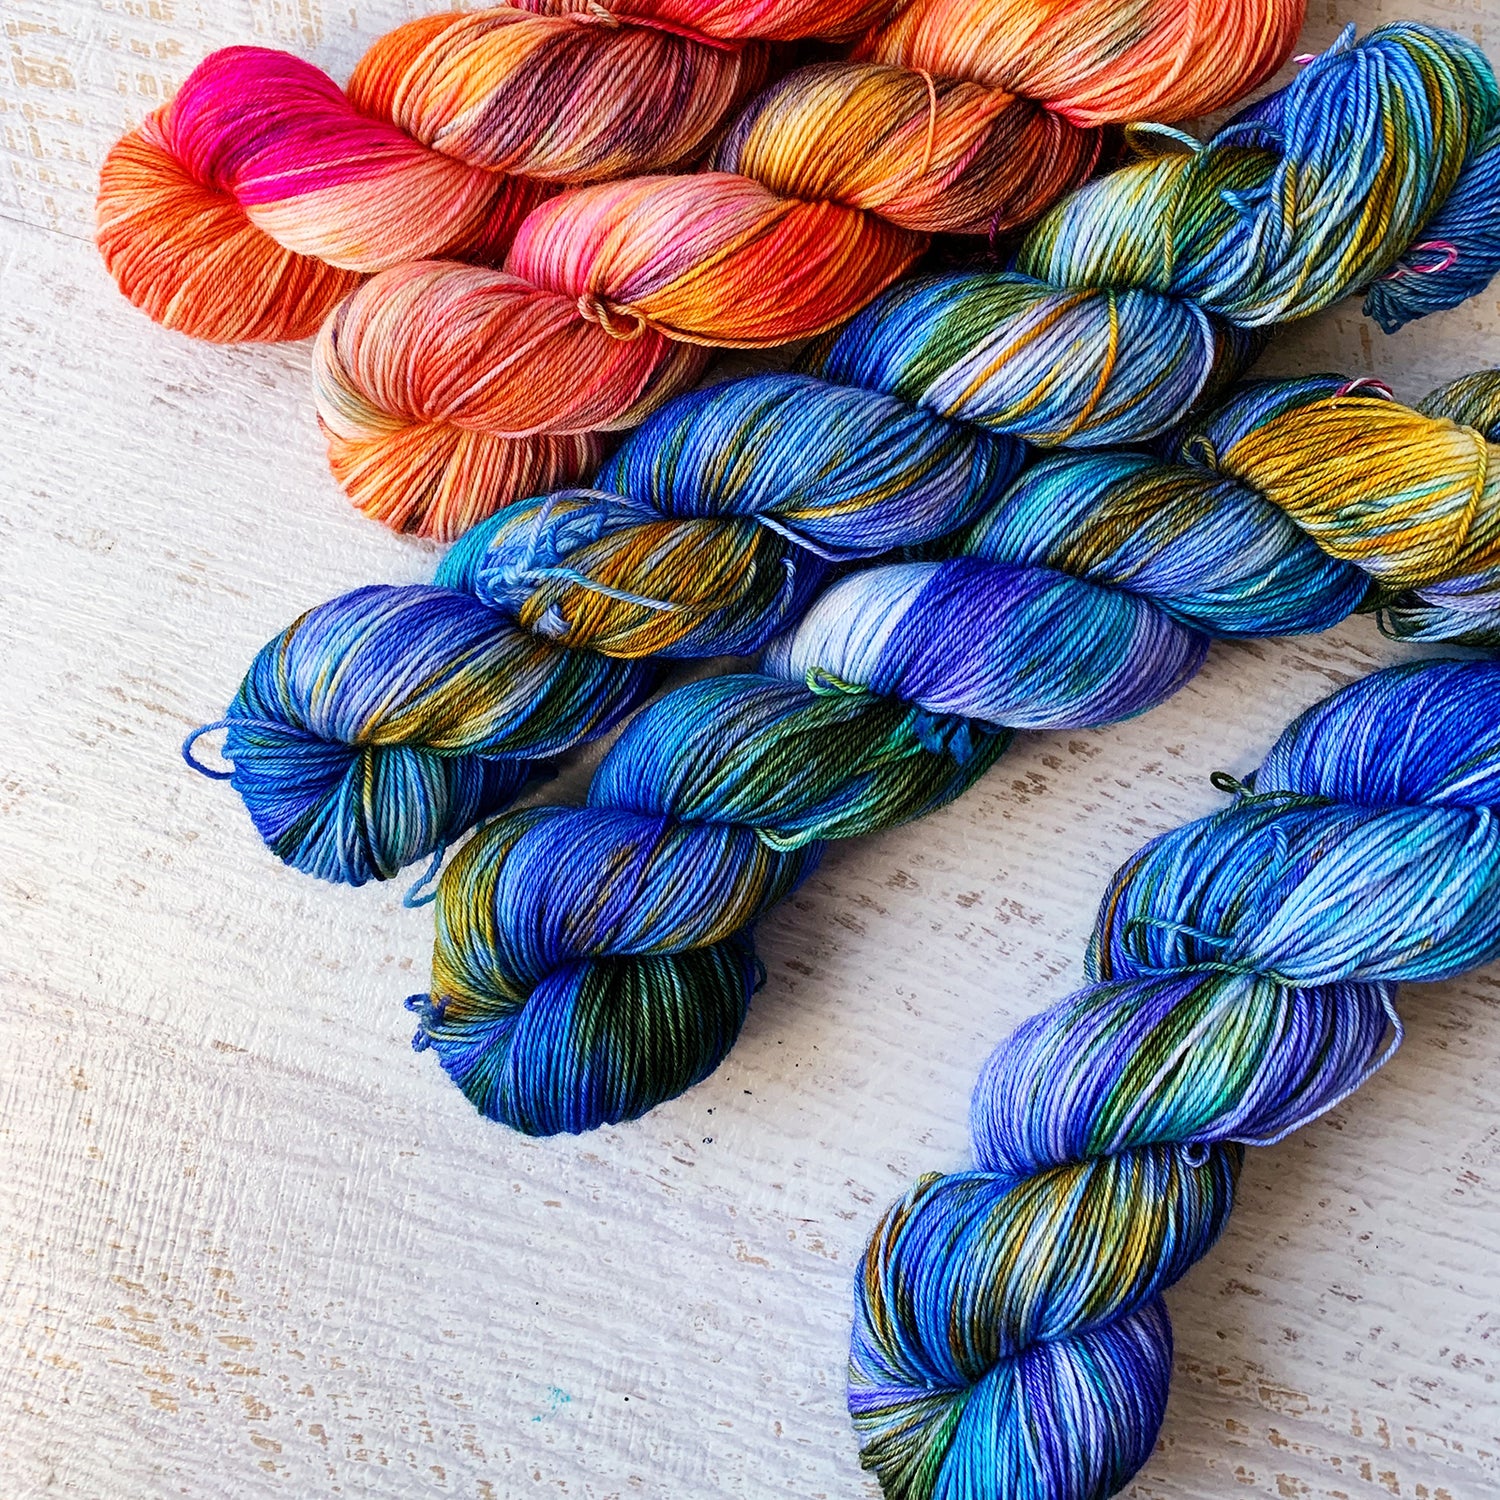 How to Spin and Knit with Variegated Yarn